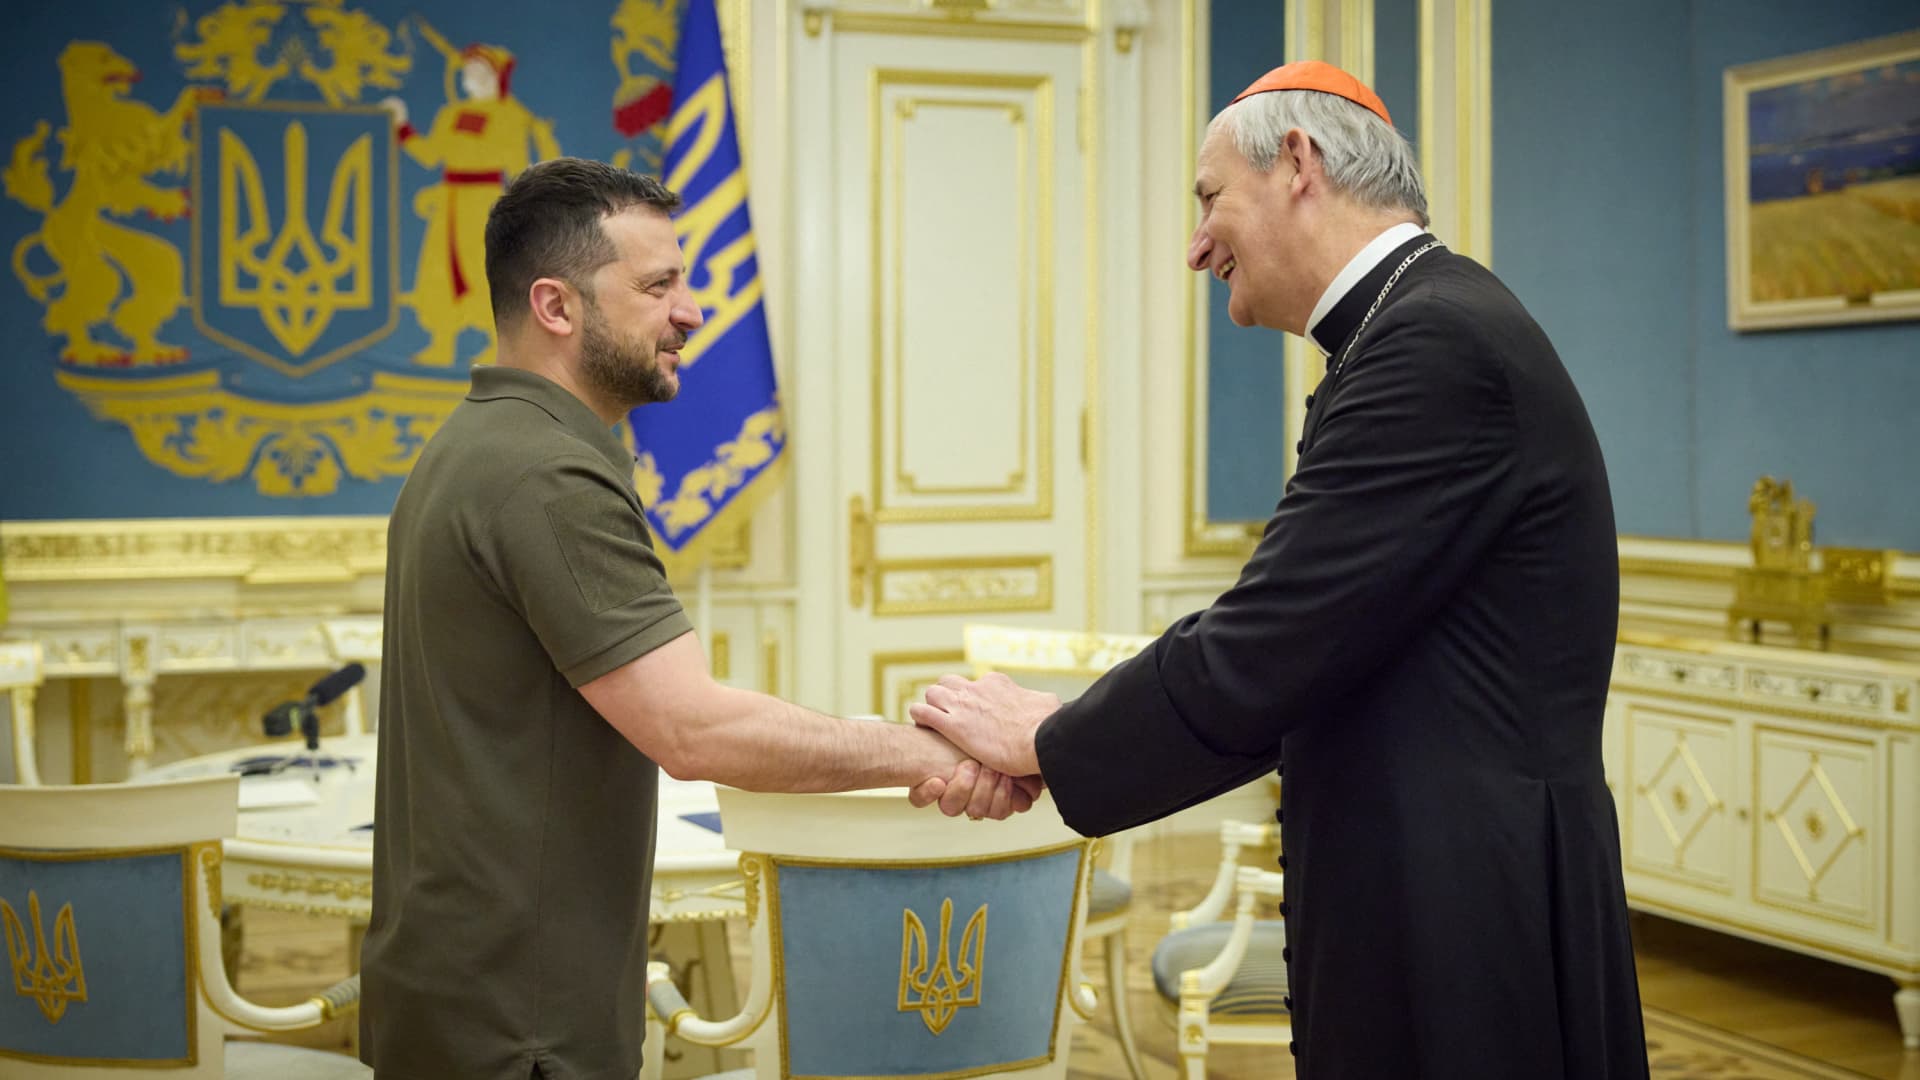 Ukraine's President Volodymyr Zelenskyy welcomes Italian Cardinal and Papal Special Envoy Matteo Zuppi in Kyiv, Ukraine, amid Russia's attack on Ukraine on June 6, 2023.